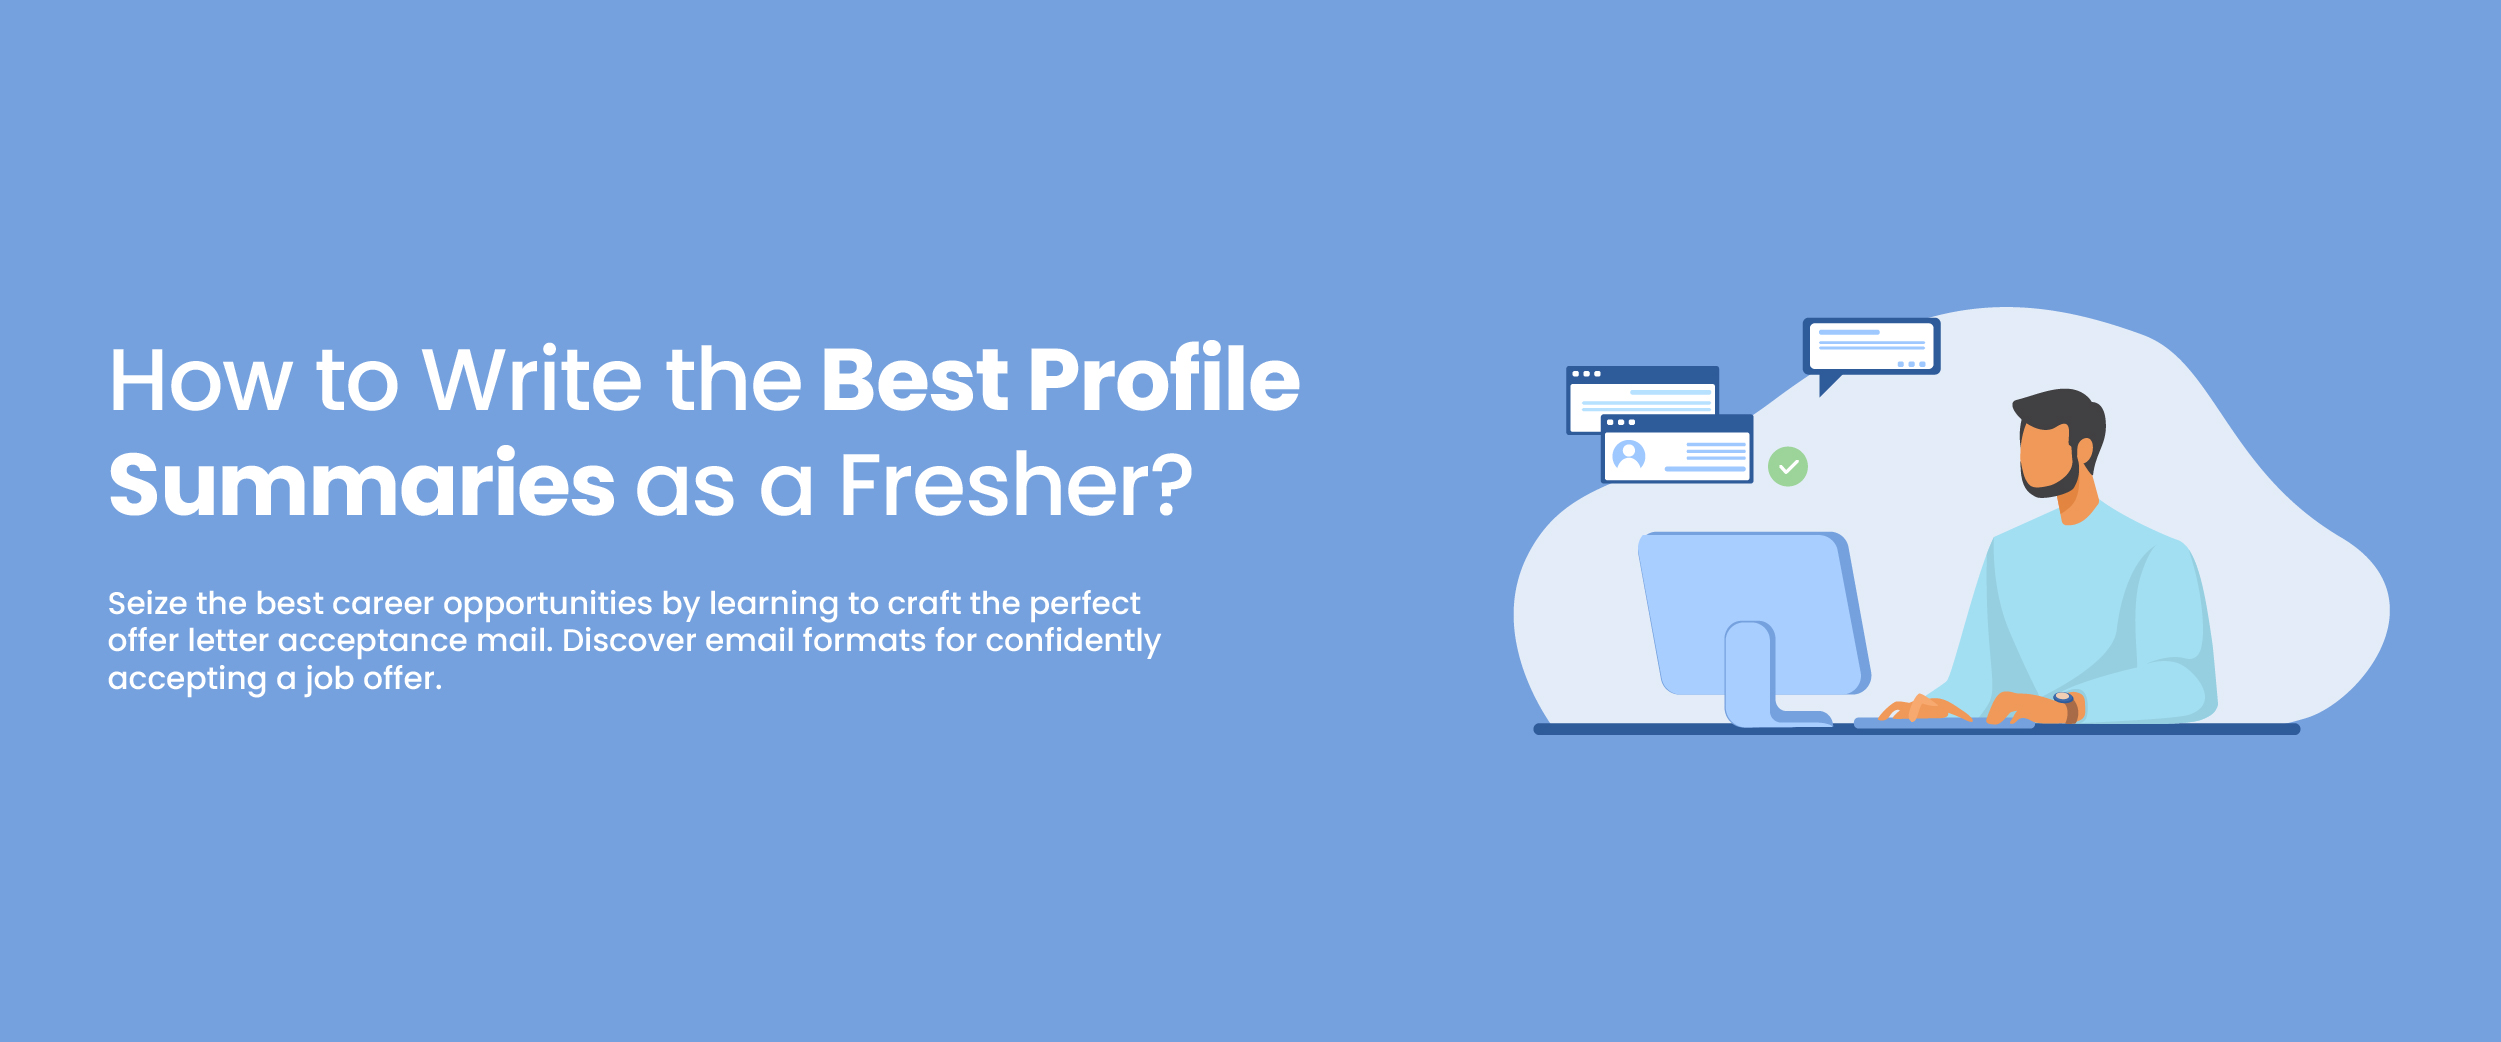 How to Write the Best Profile Summaries as a Fresher